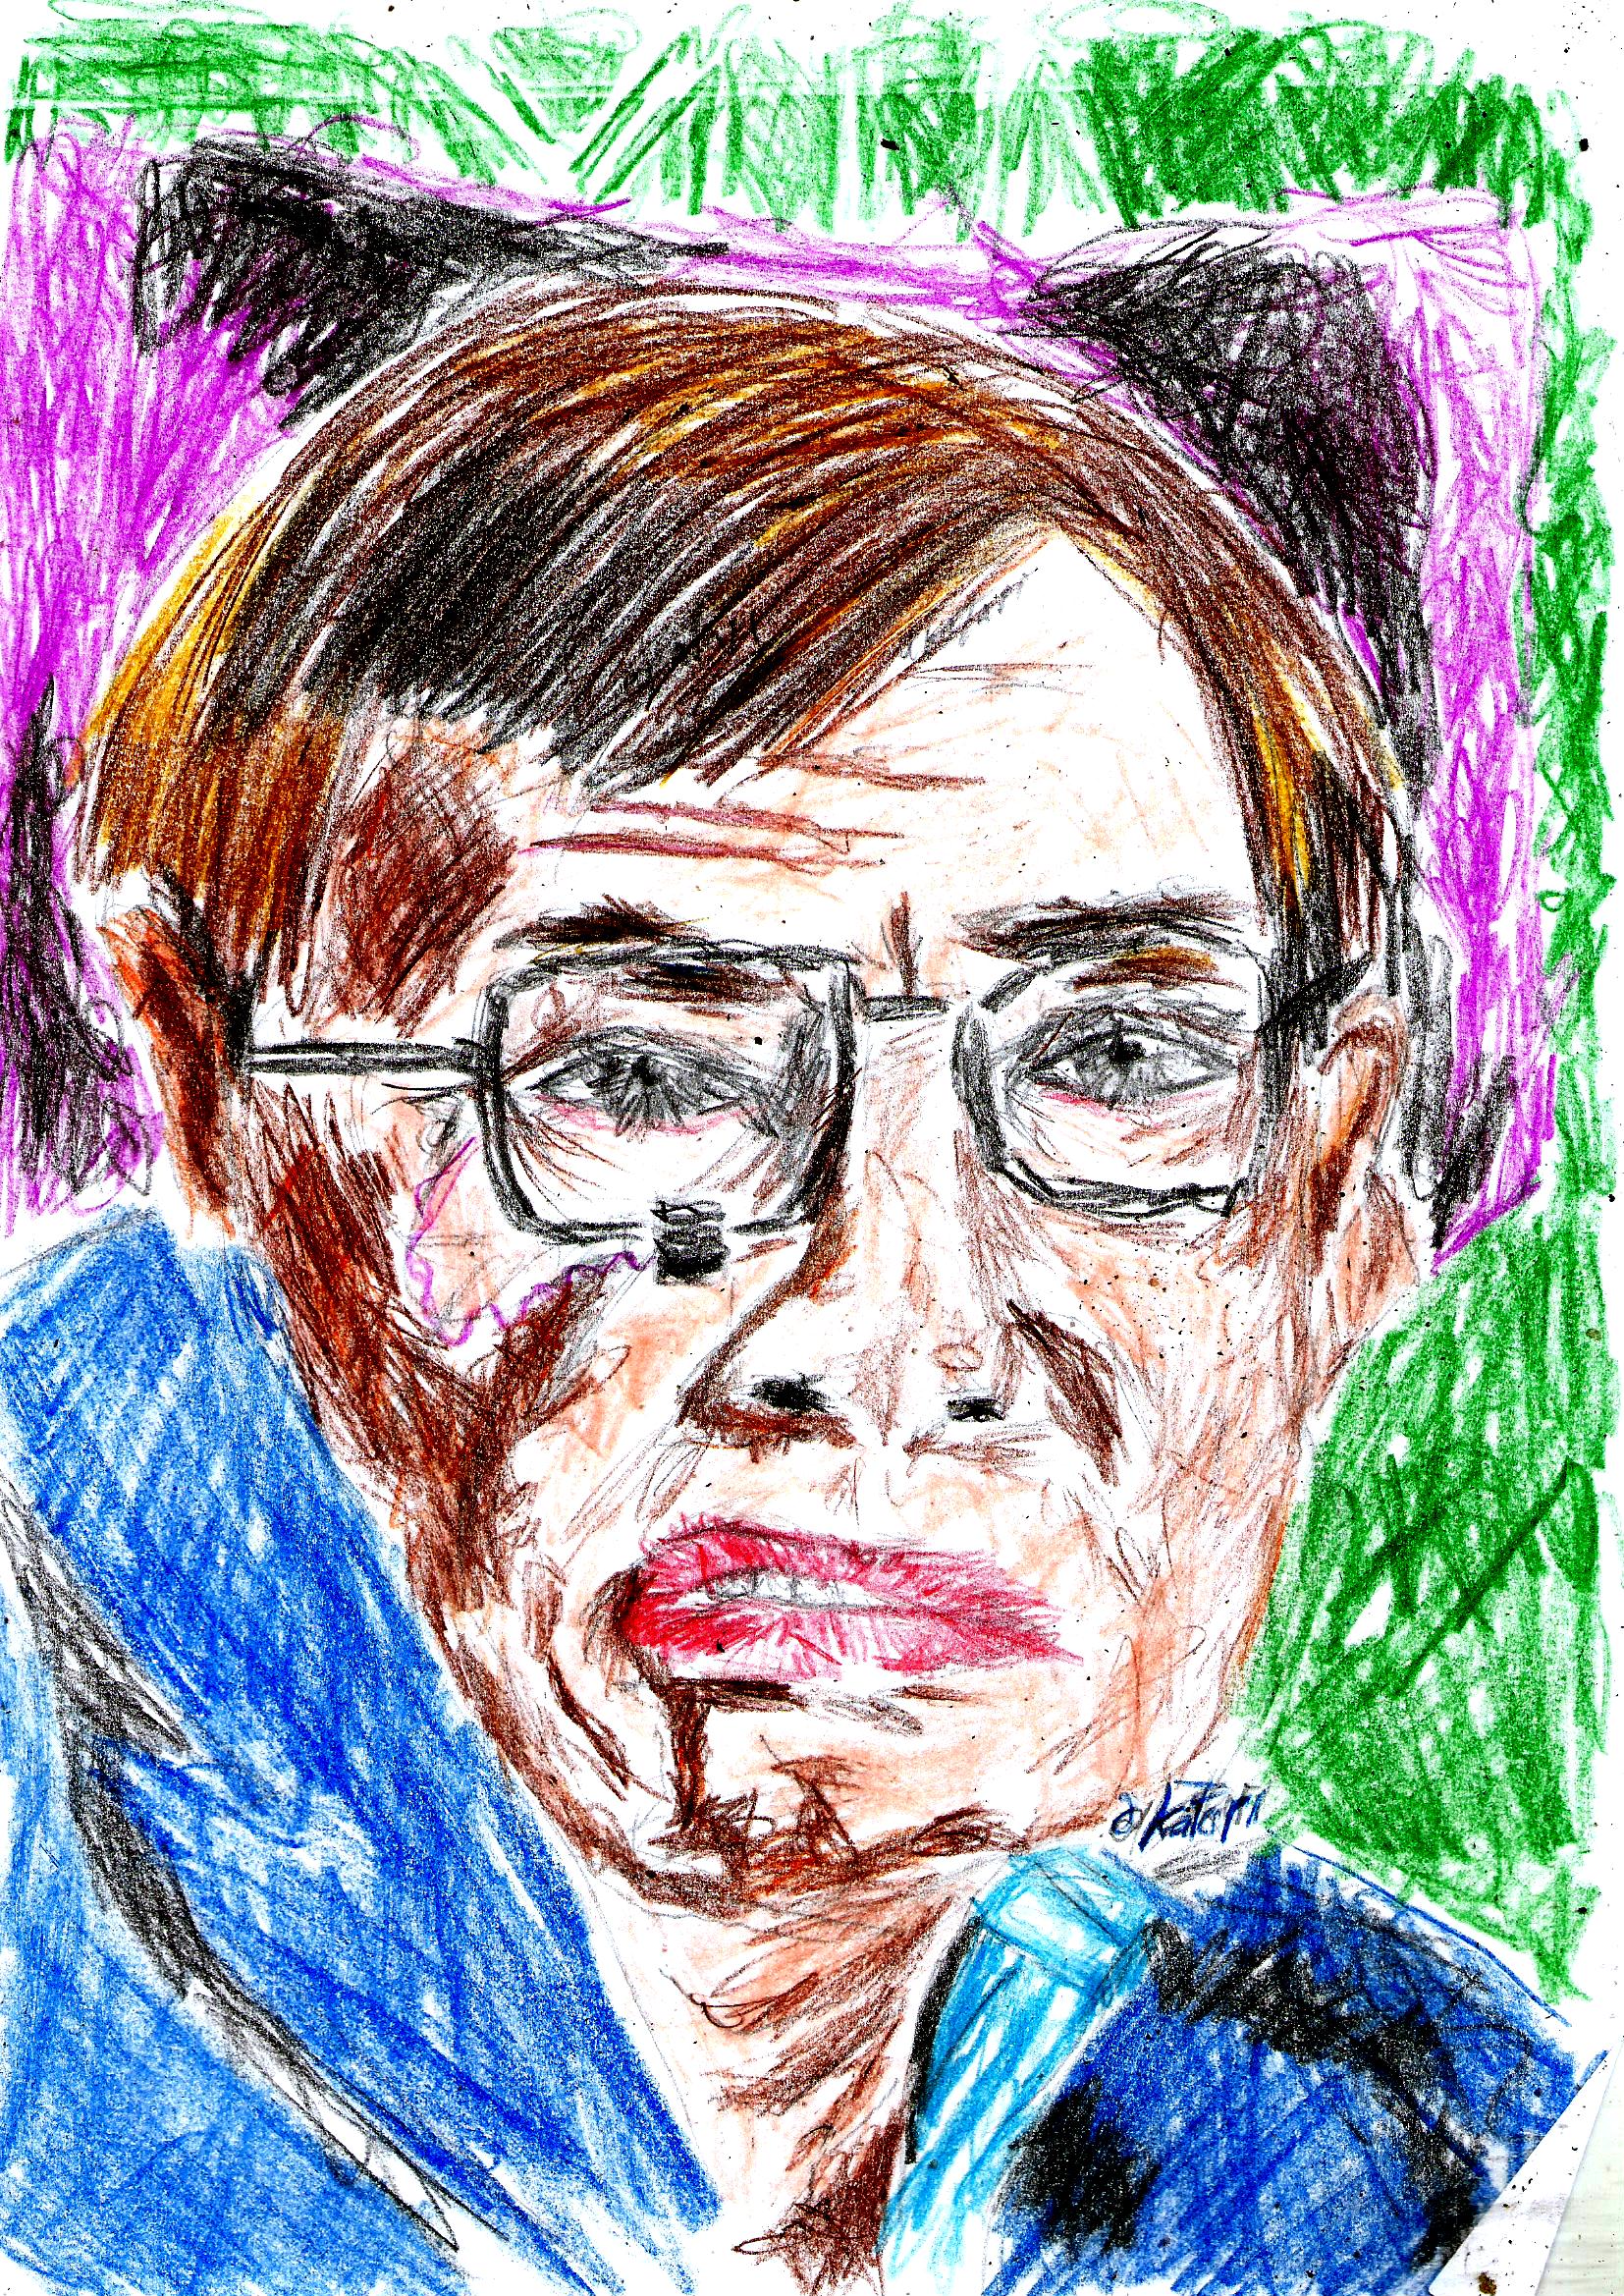 Drawing Stephen Hawking / A tribute - YouTube